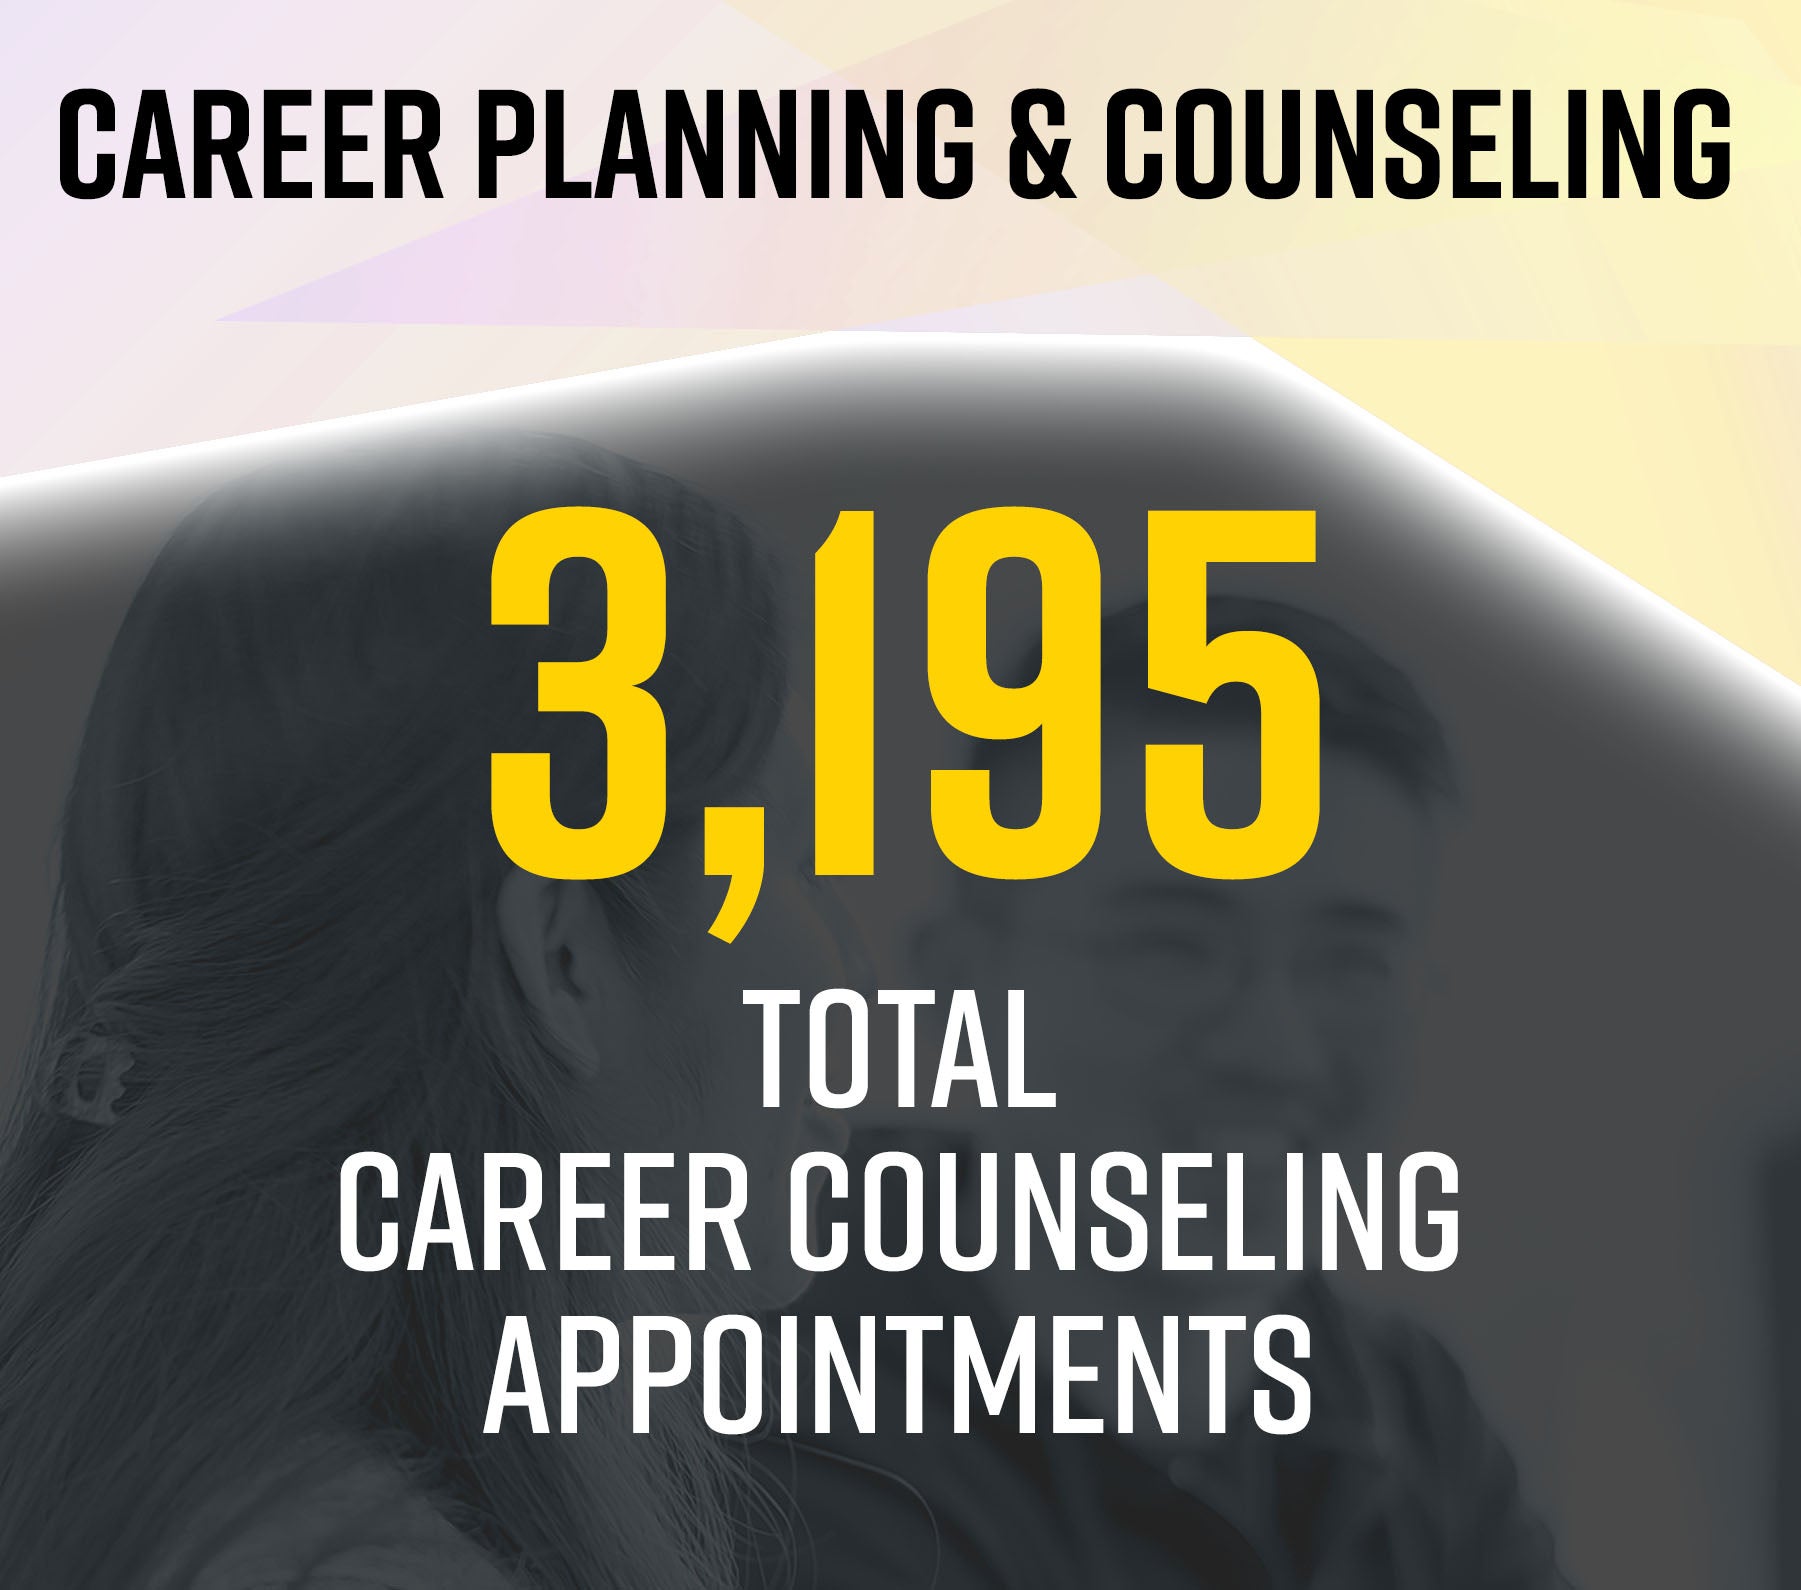 Career Planning and Counseling - Total Career Counseling Appointments 20-21